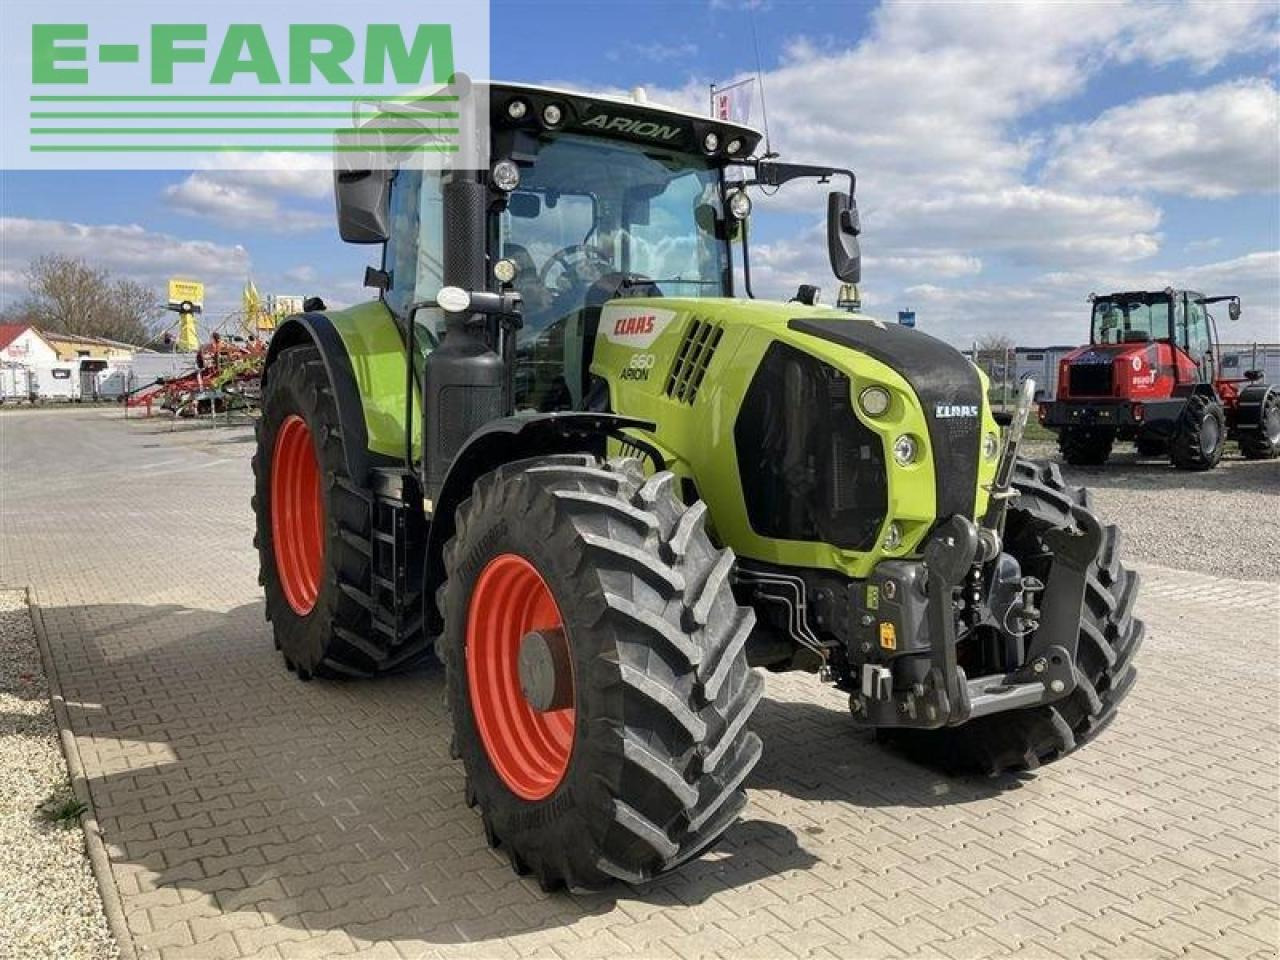 Tractor CLAAS arion 660 cmatic st5 cebis